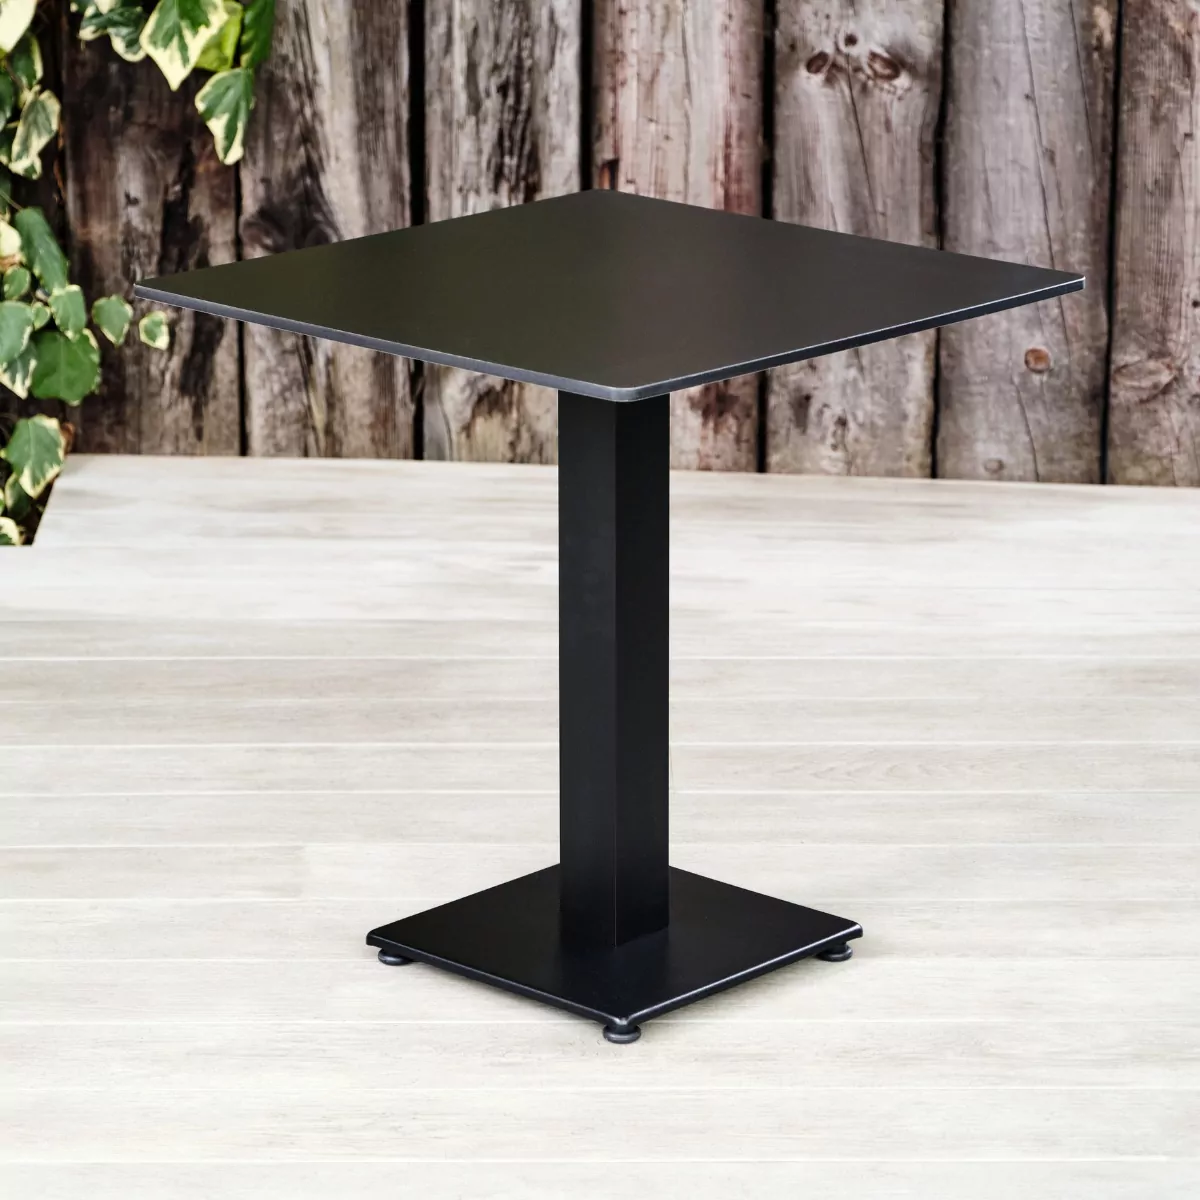 Black Rockingham Square Pedestal Table with Square Base. Suitable for Indoor & Outdoor Use.